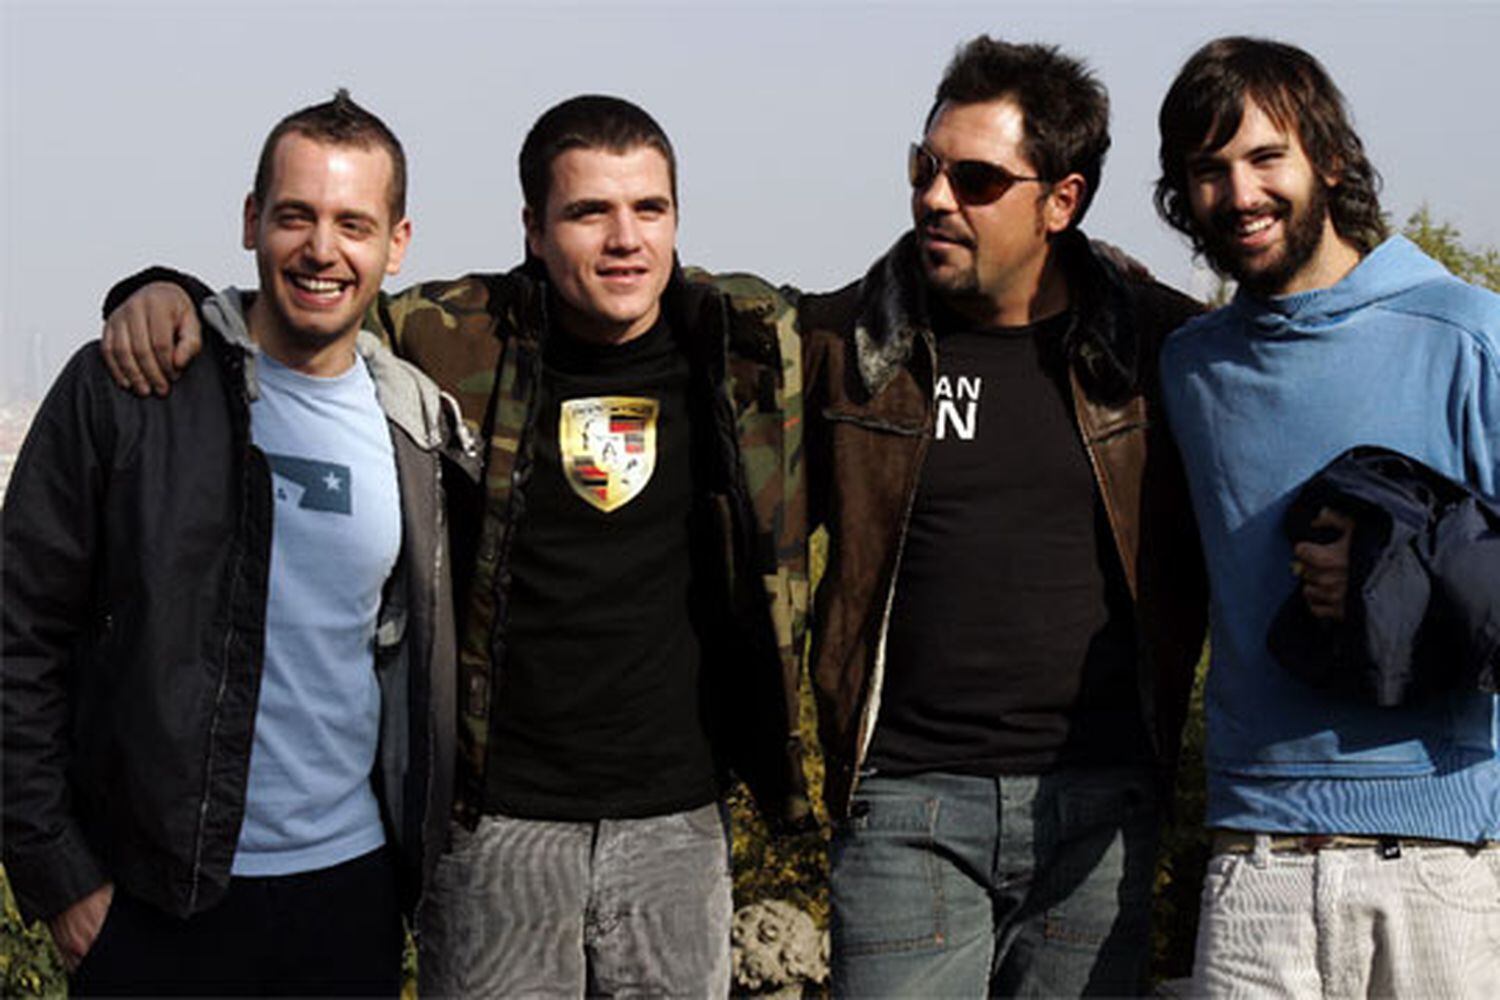 El Canto del Loco in the mid-nineties.  From left to right, Chema Ruiz (bass), Dani Martín (voice), Jandro Velázquez (drums) and David Otero (guitar).